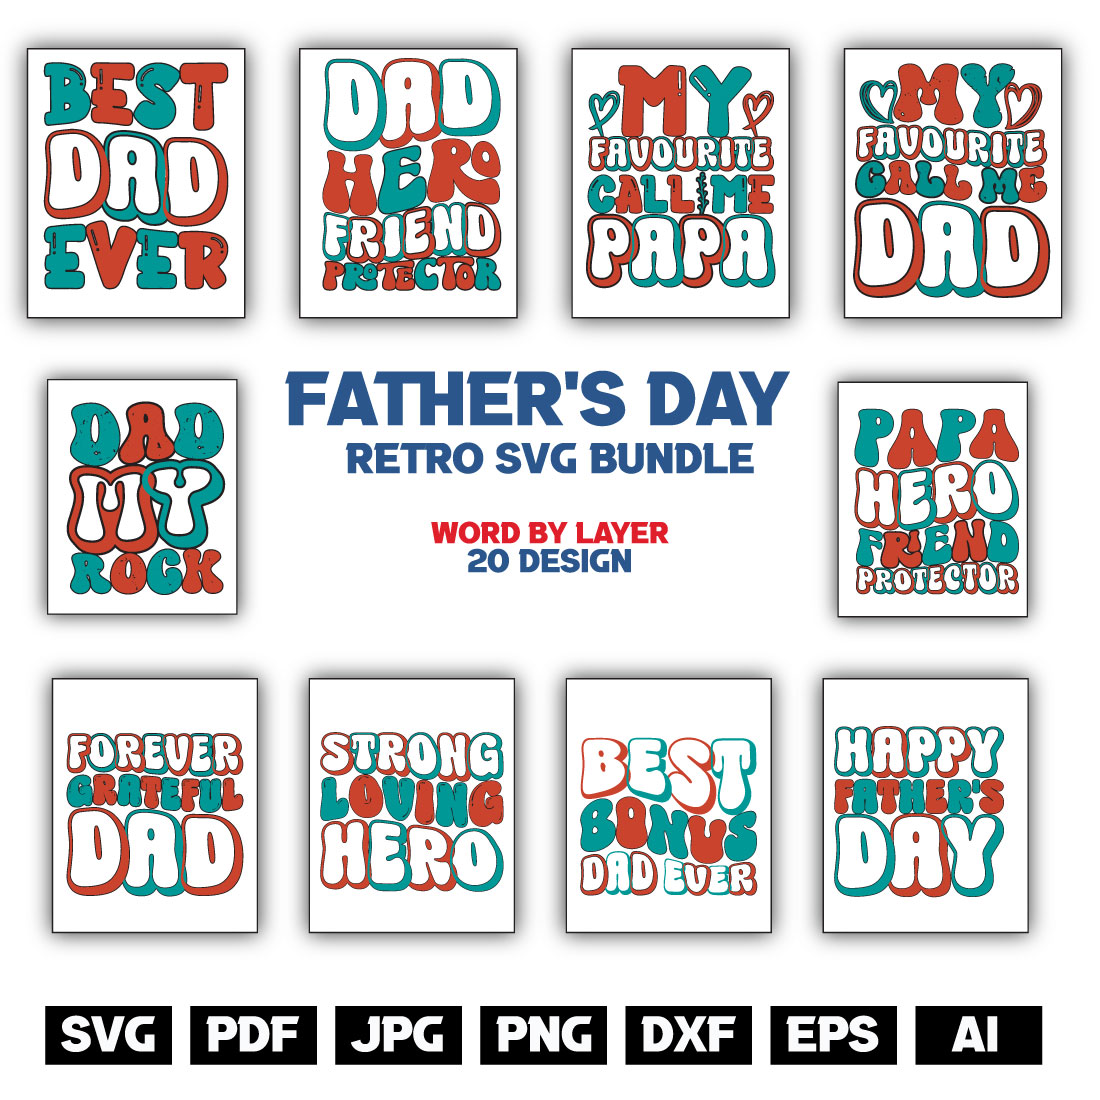 FATHER'S DAY RETRO SVG preview image.